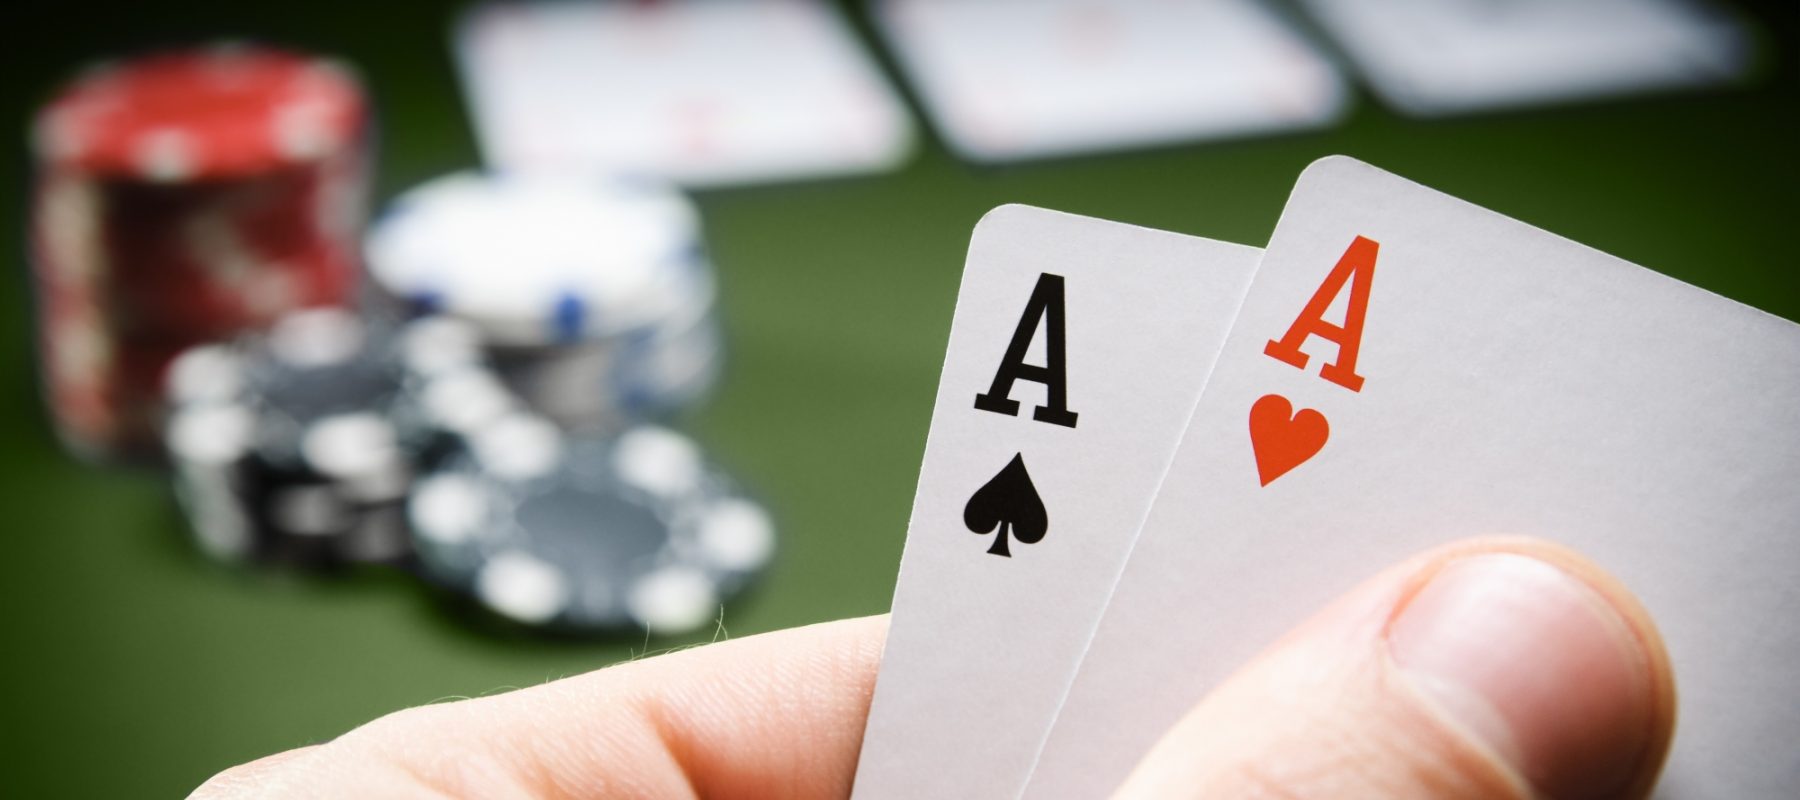 HOW TO FIND THE RELIABLE ONLINE CASINOS?